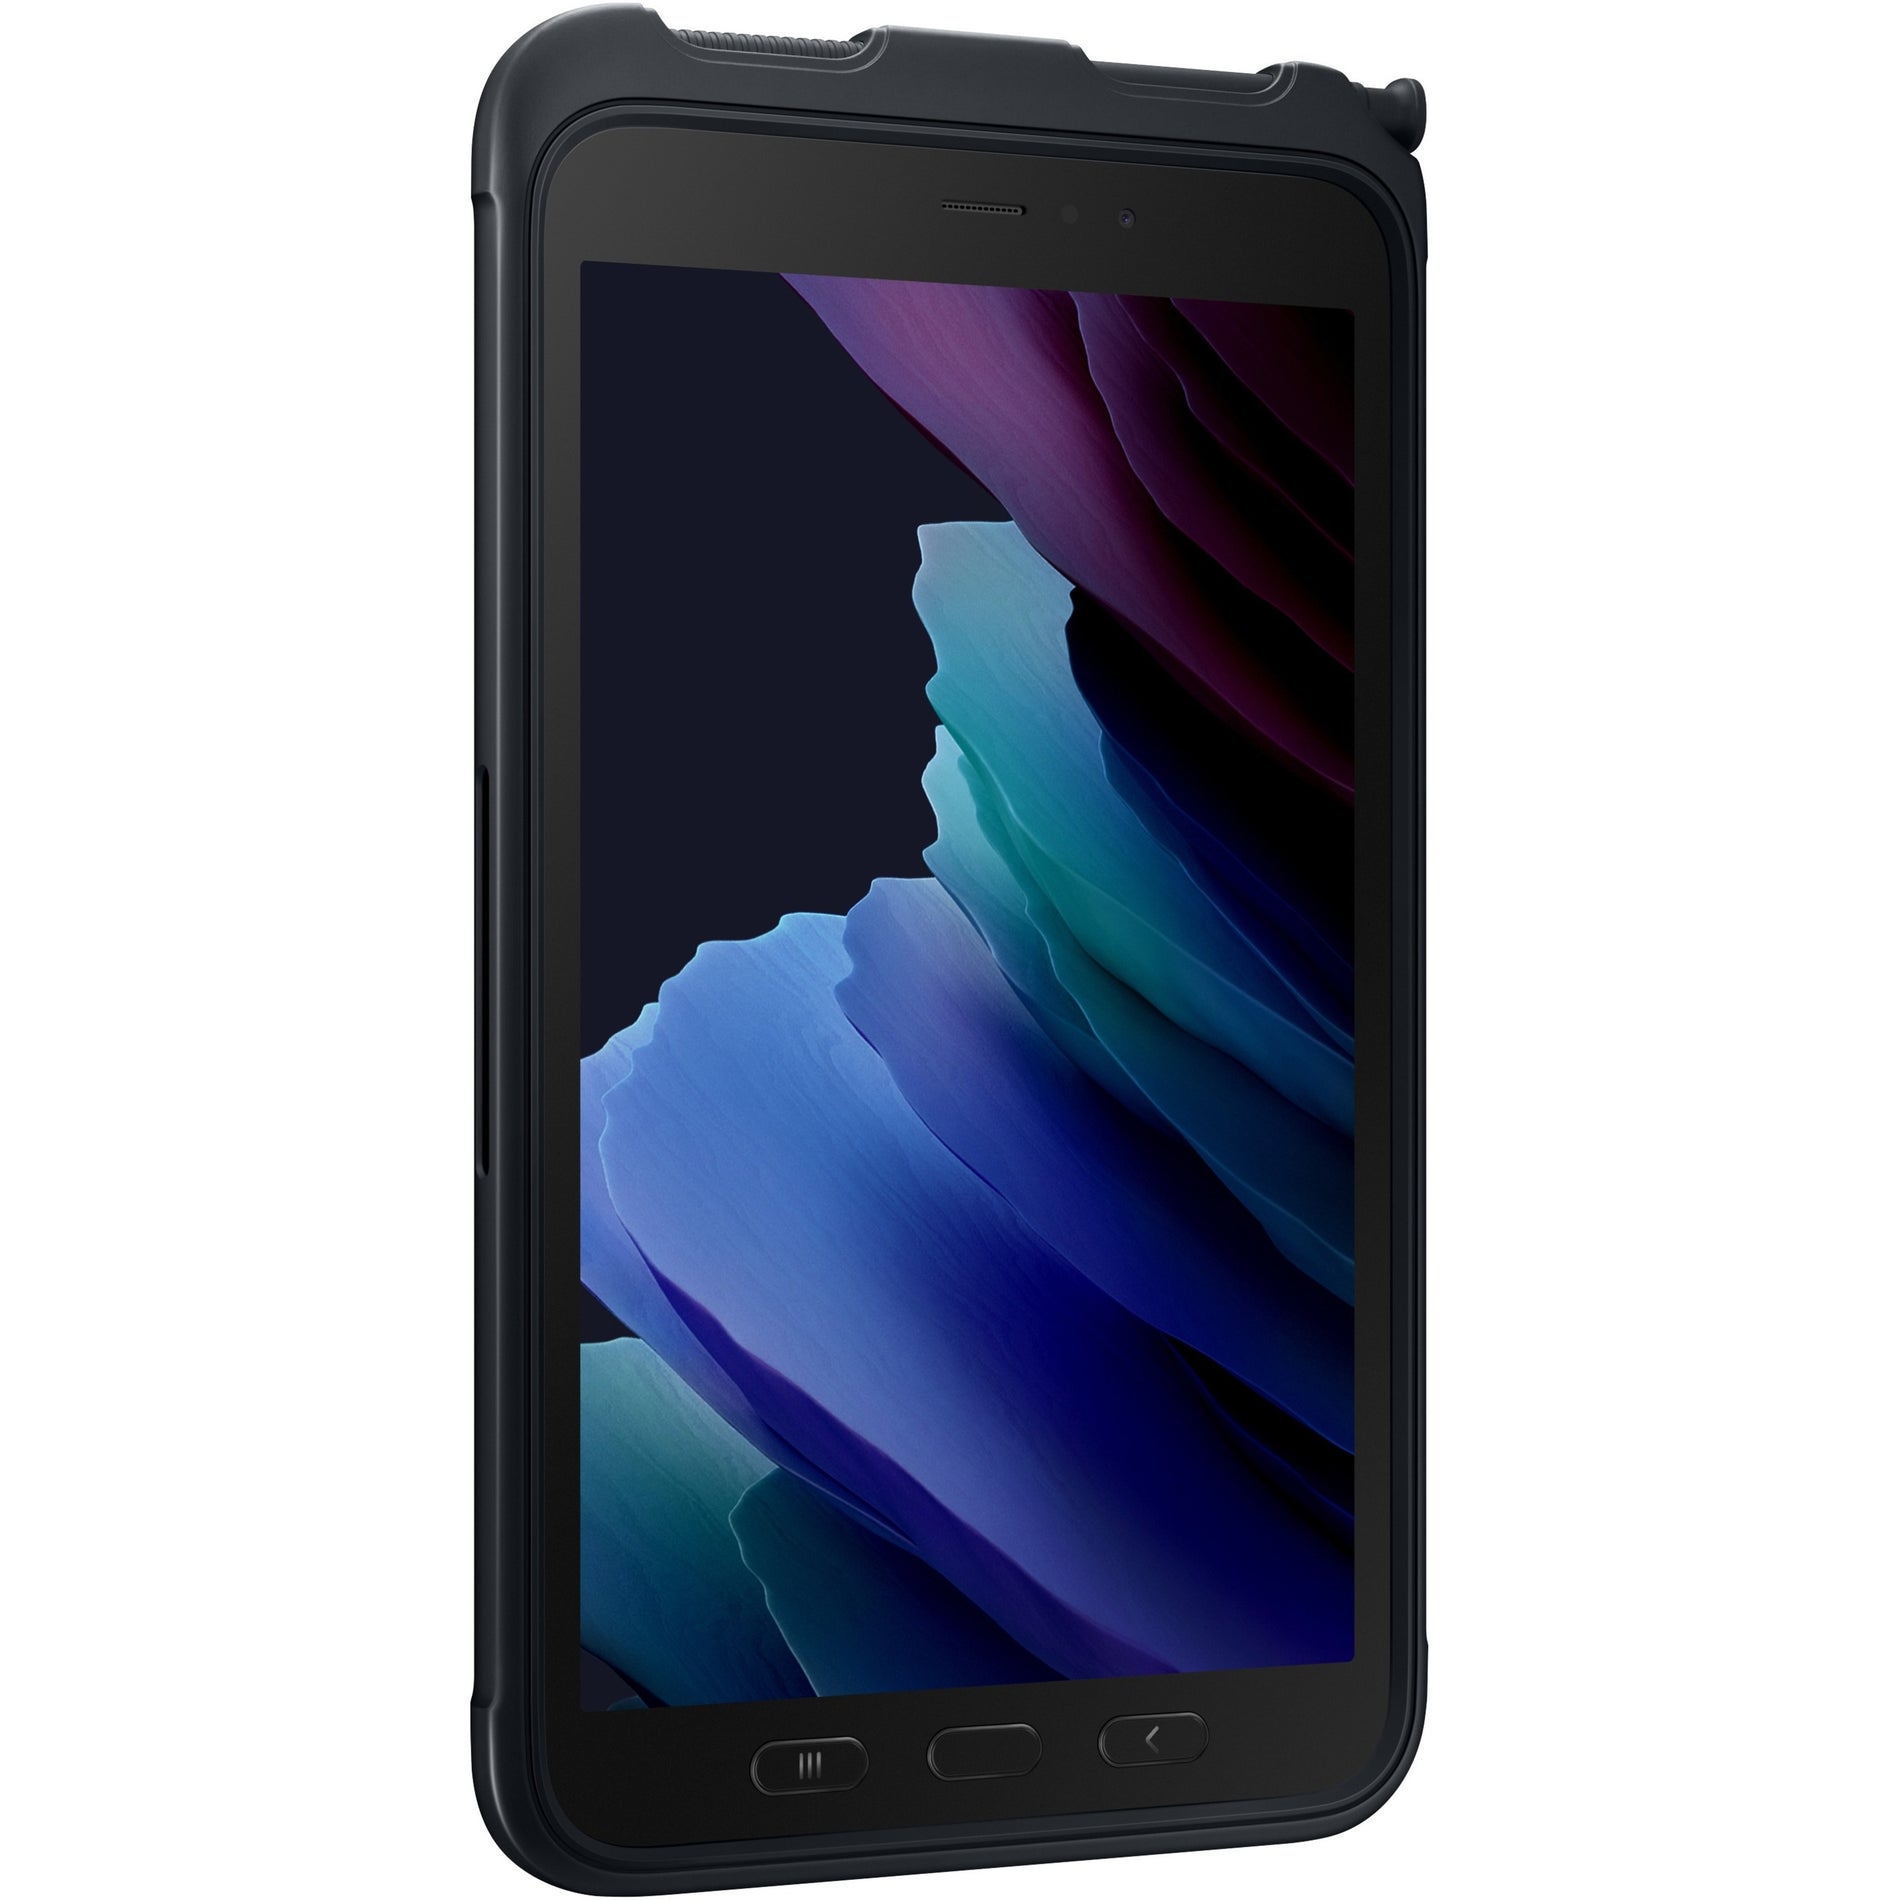 Samsung Galaxy Tab Active3 Rugged Tablet - 8" WUXGA - Octa-core (8 Core) 2.70 GHz 1.70 GHz - 4 GB RAM - 64 GB Storage - Android 10 - 4G - Black (SM-T577UZKDN14) Alternate-Image5 image